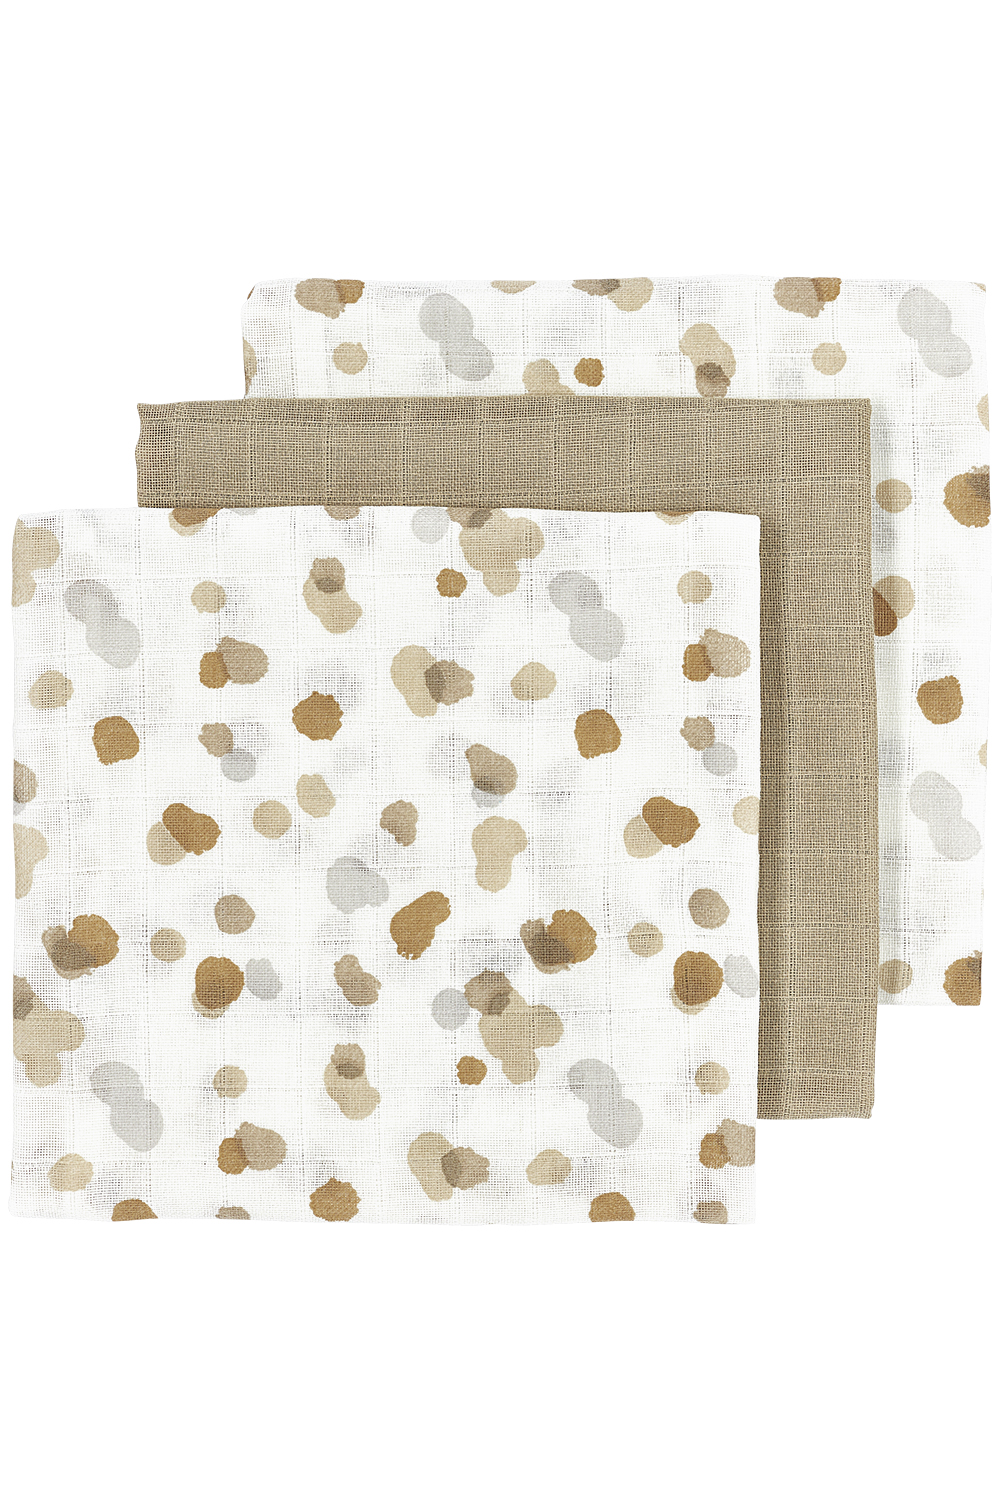 Mullwindeln 3er pack Stains - sand - 70x70cm